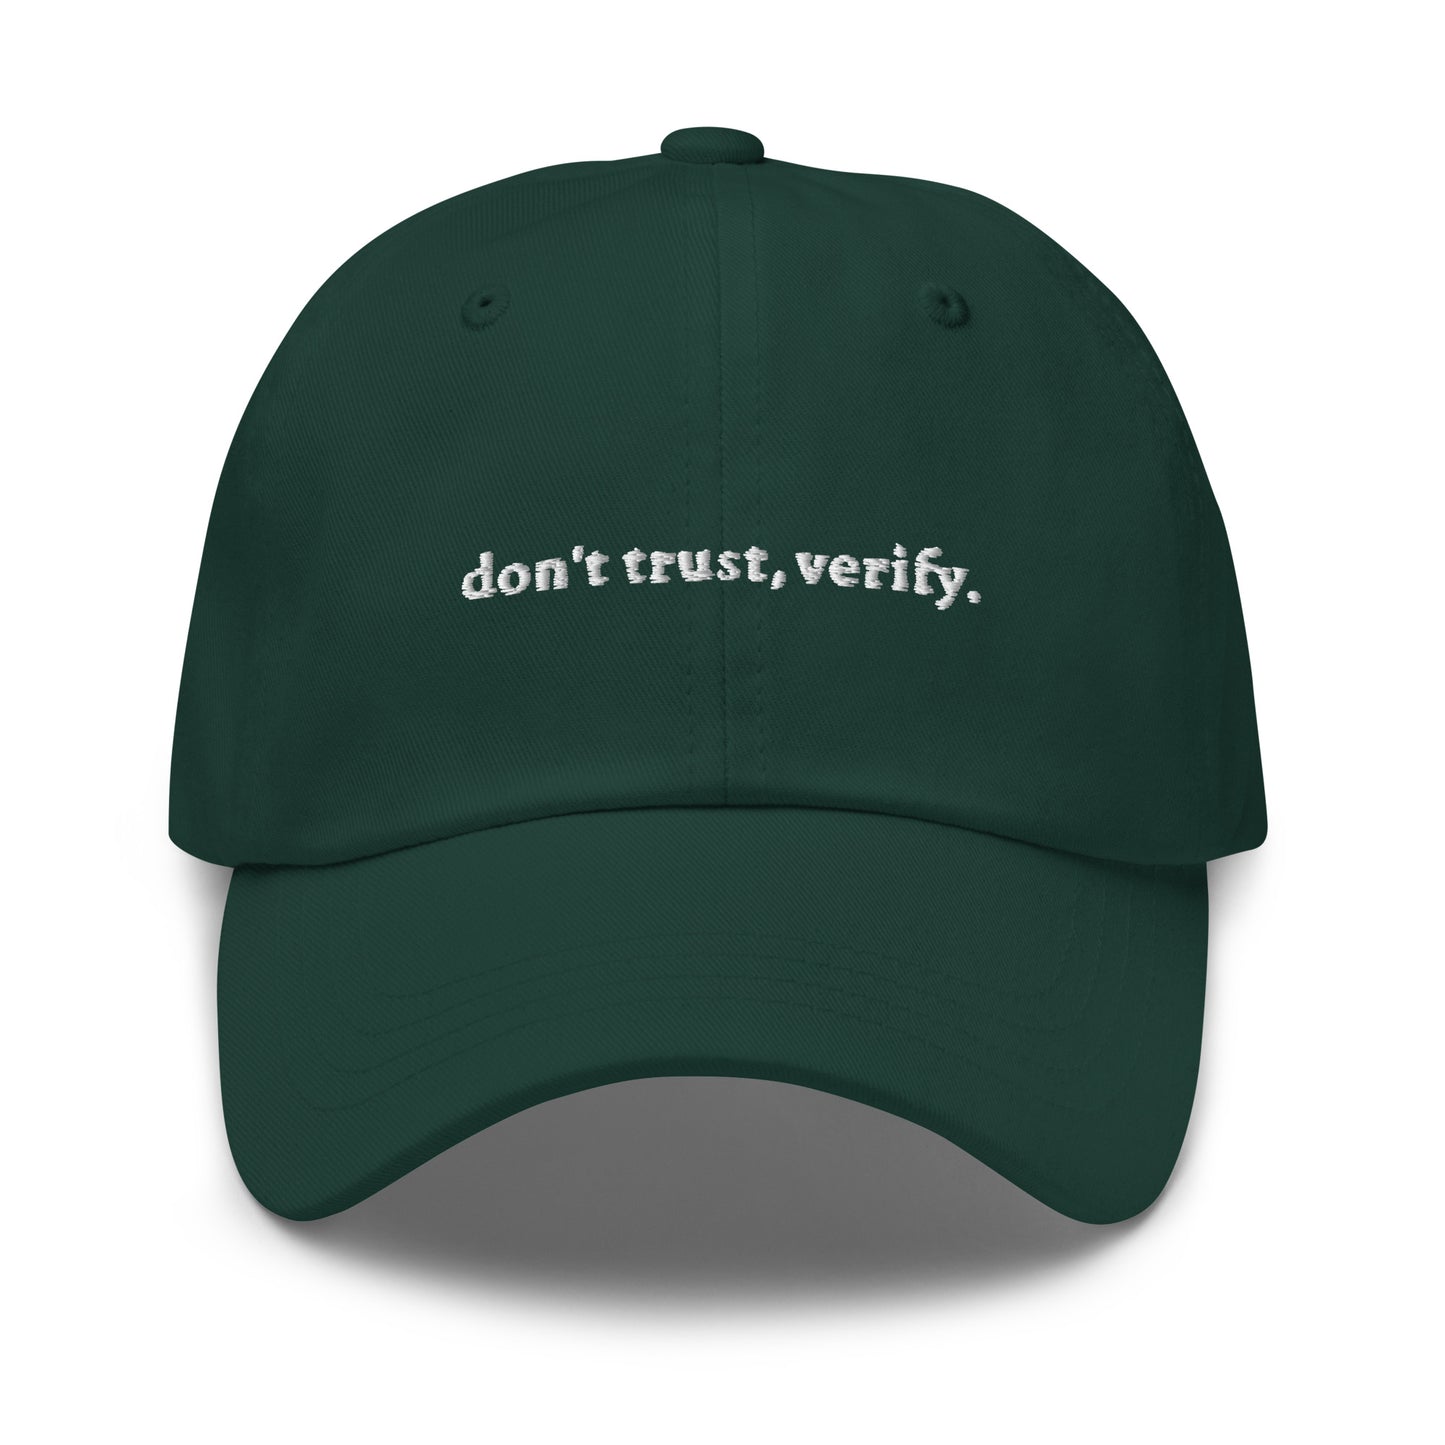 Forest don't trust verify dad hat